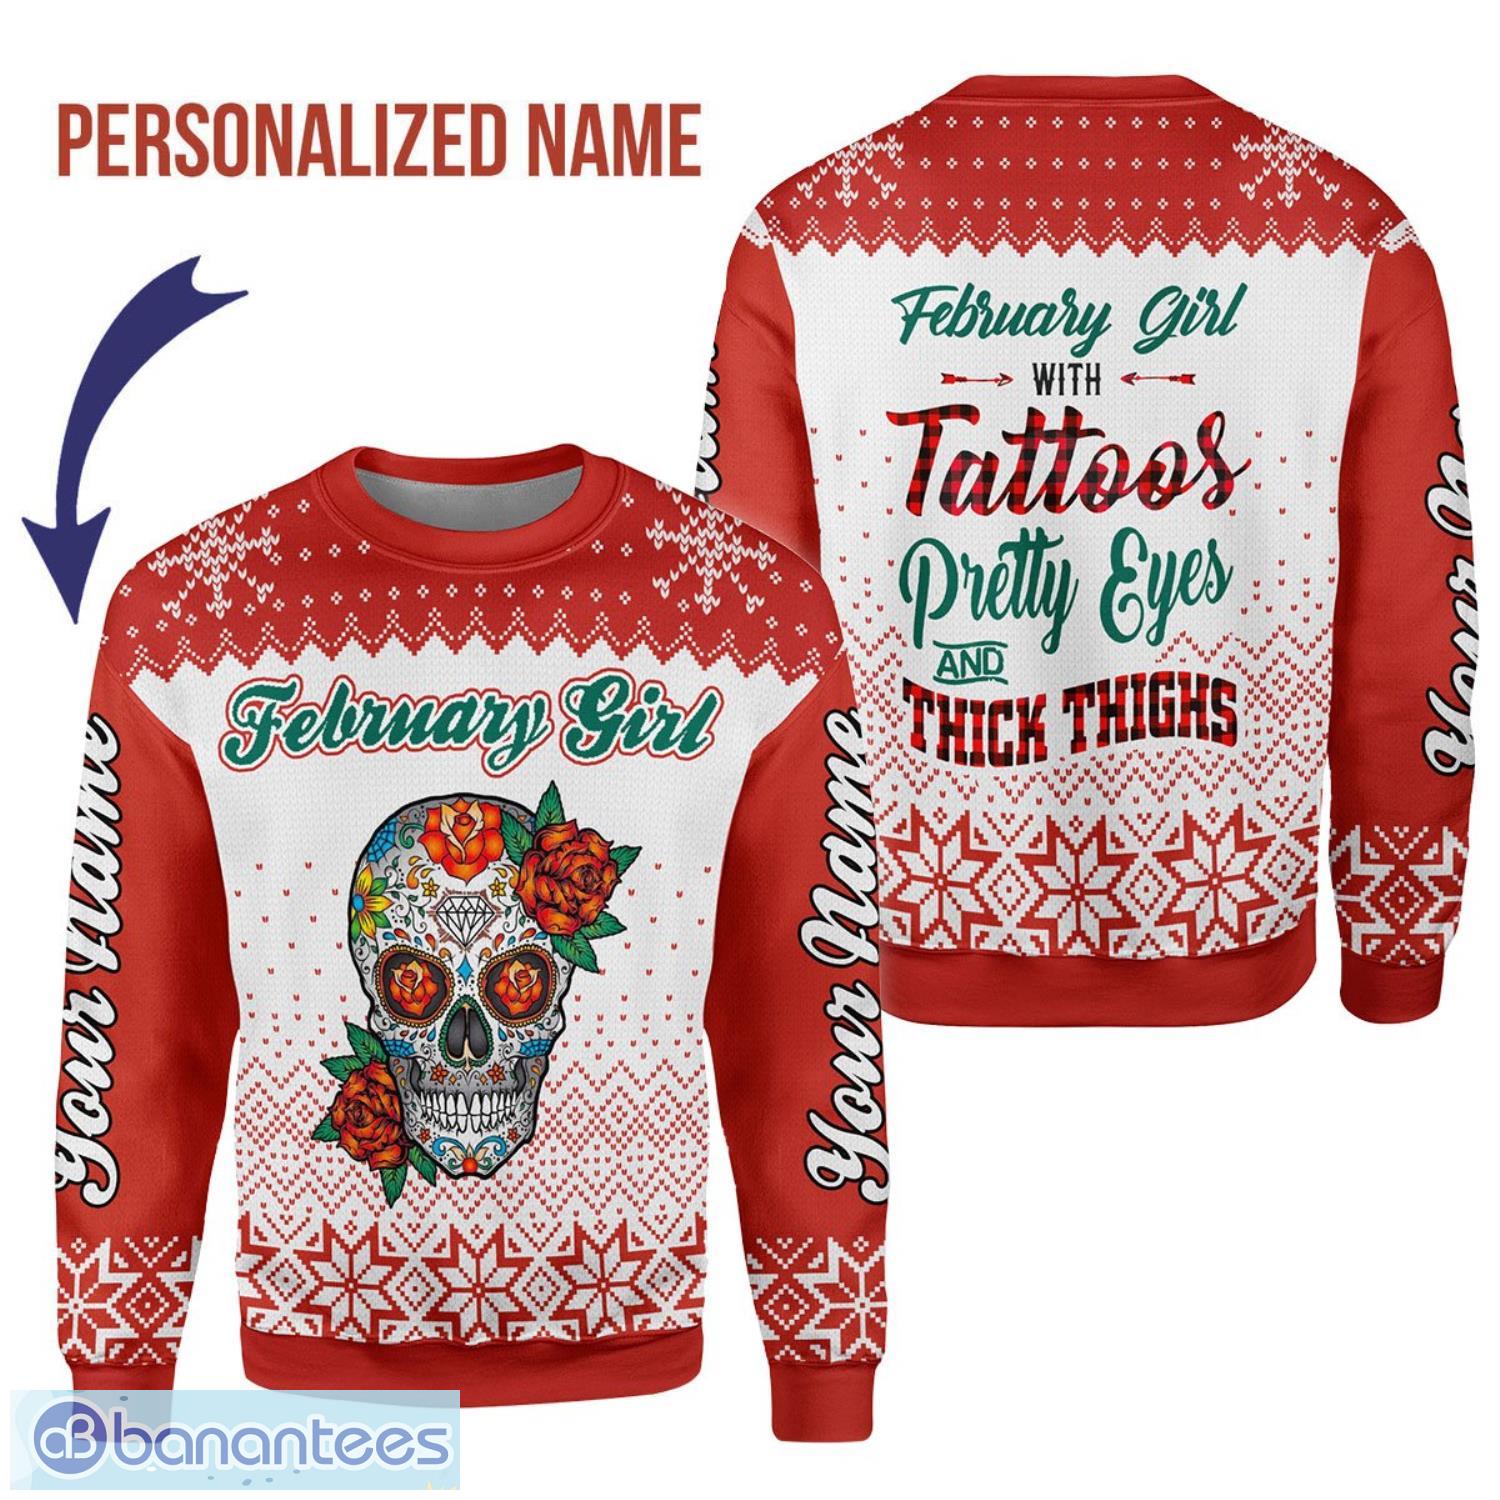 Personalized Name February Girl With Tatoos Pretty Eyes And Thick Thighs 3D Ugly Christmas Sweater Christmas Gift Product Photo 1